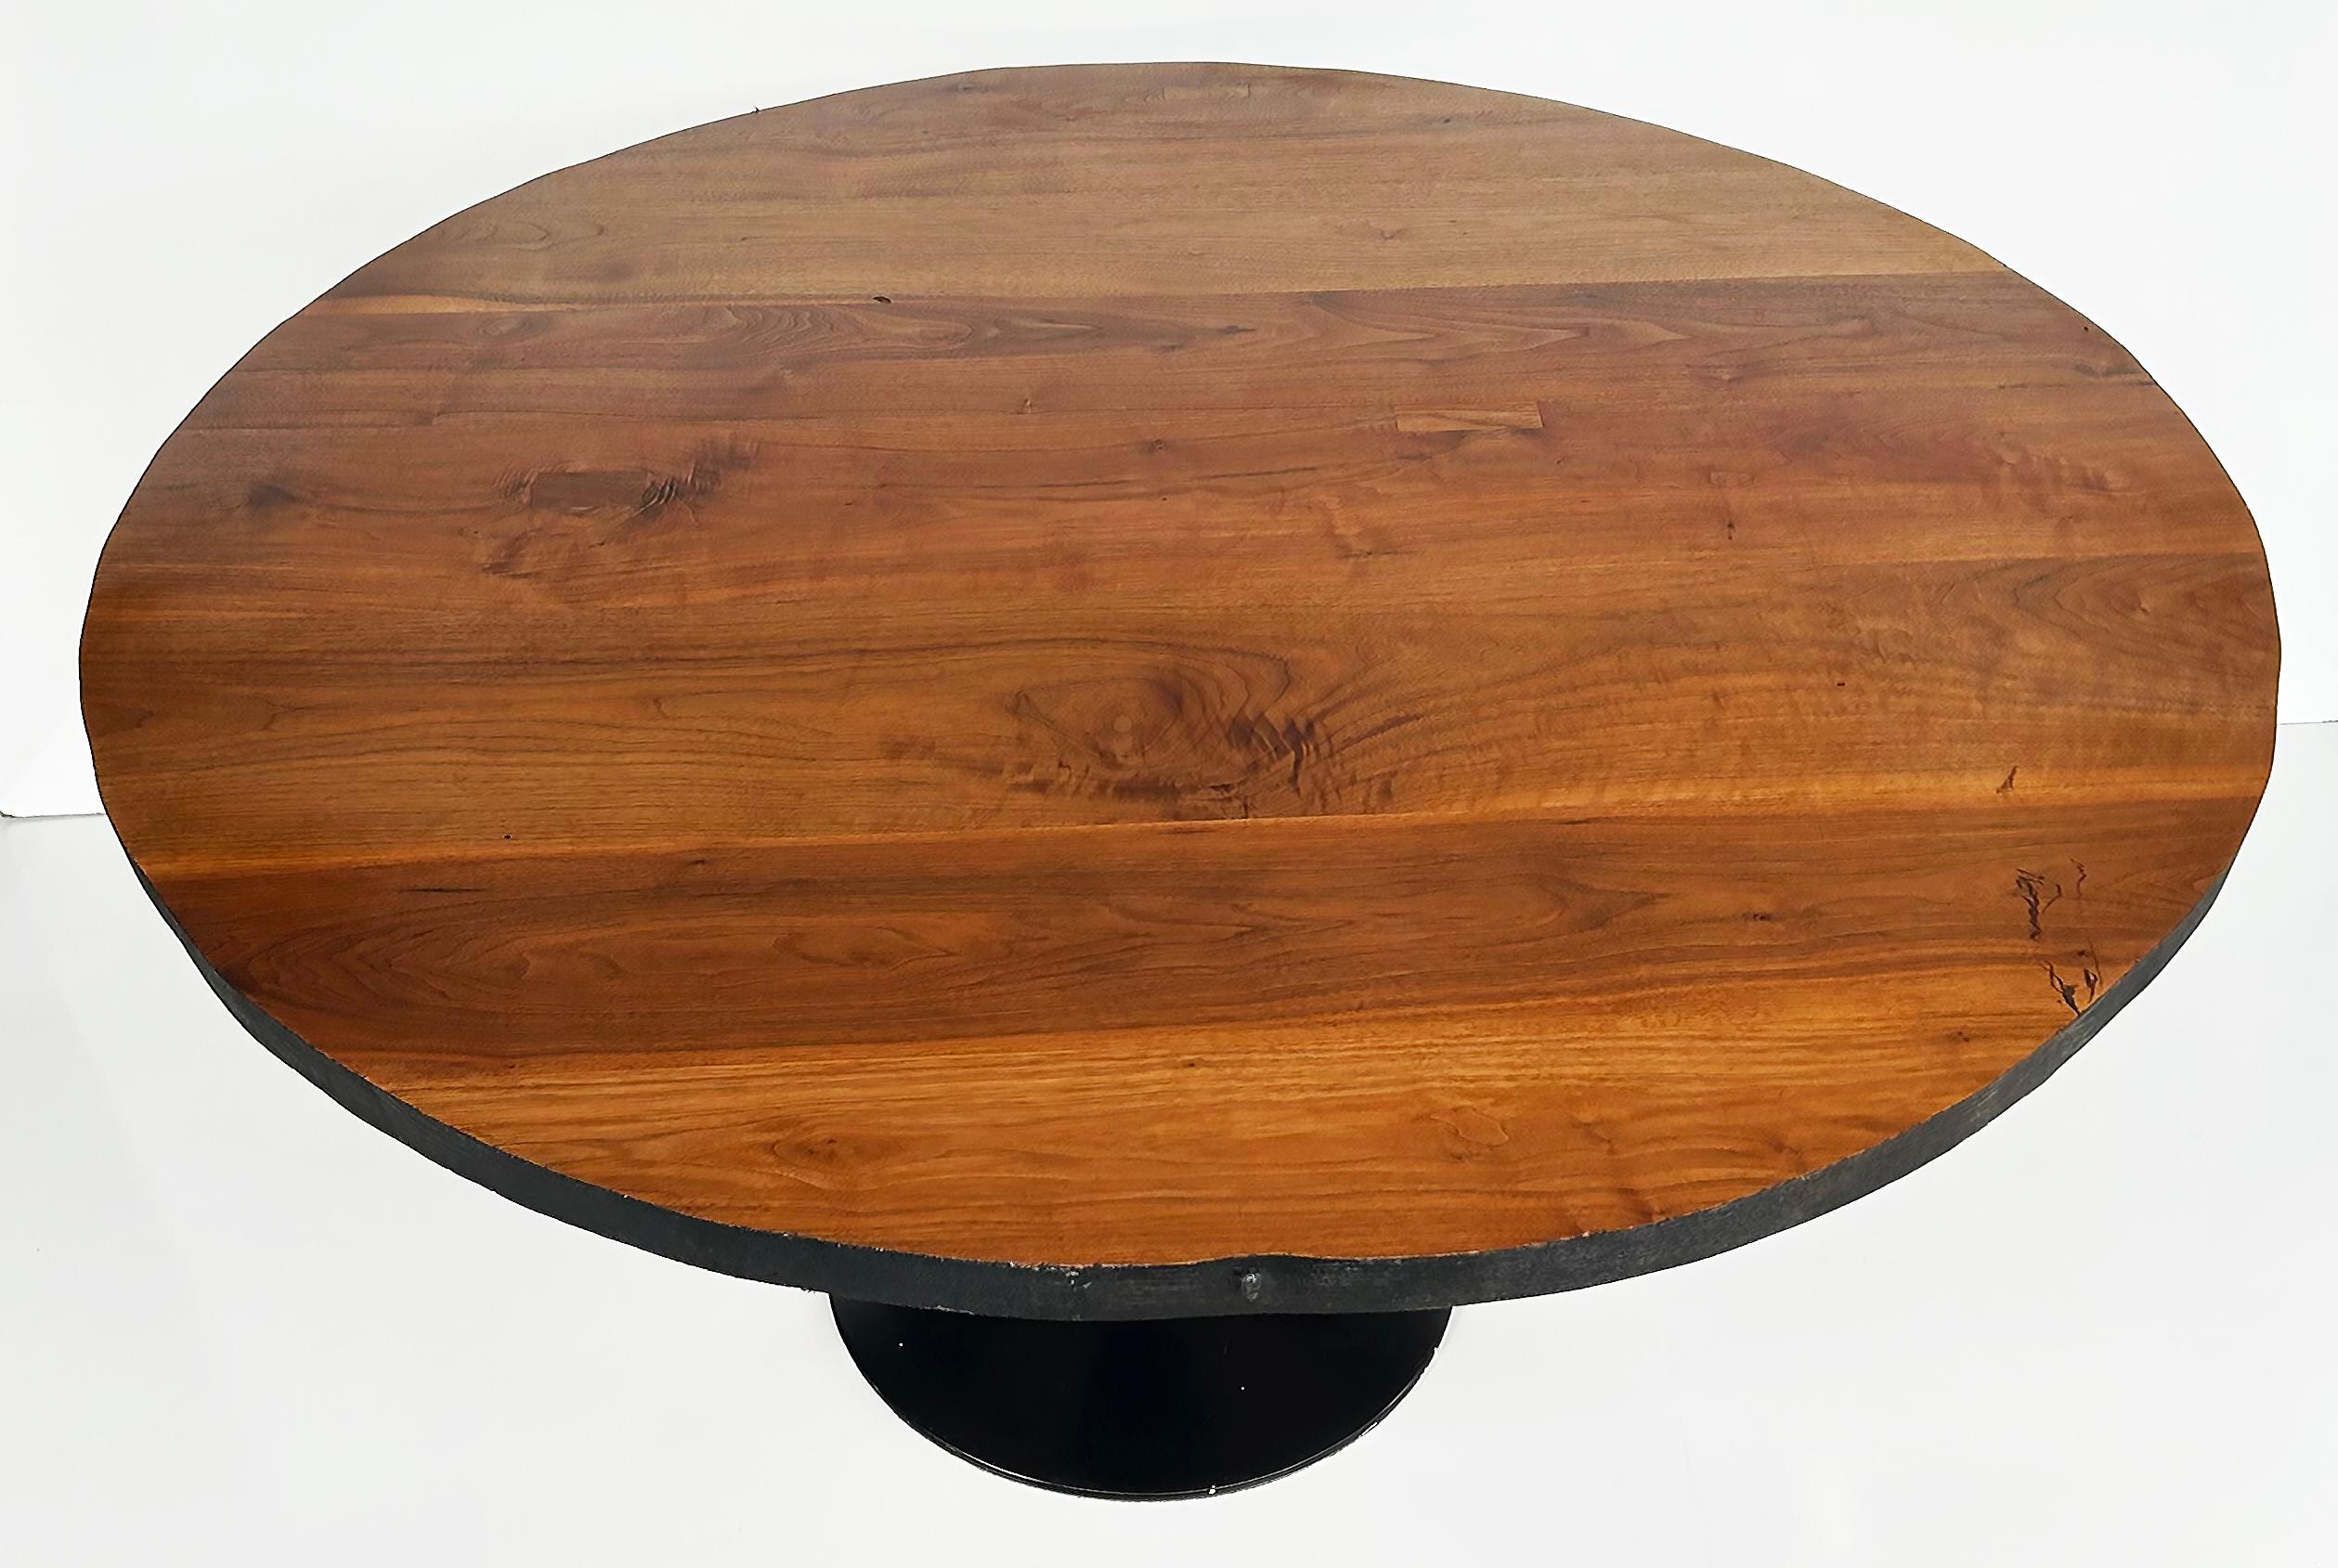 Organic Modern Industrial Tulip Dining Table with Recycled Wood Top

Offered for sale is a round, organic modern industrial dining table acquired from Organic Modernism in Brooklyn, NY.  This substantial, large round dining table has a black